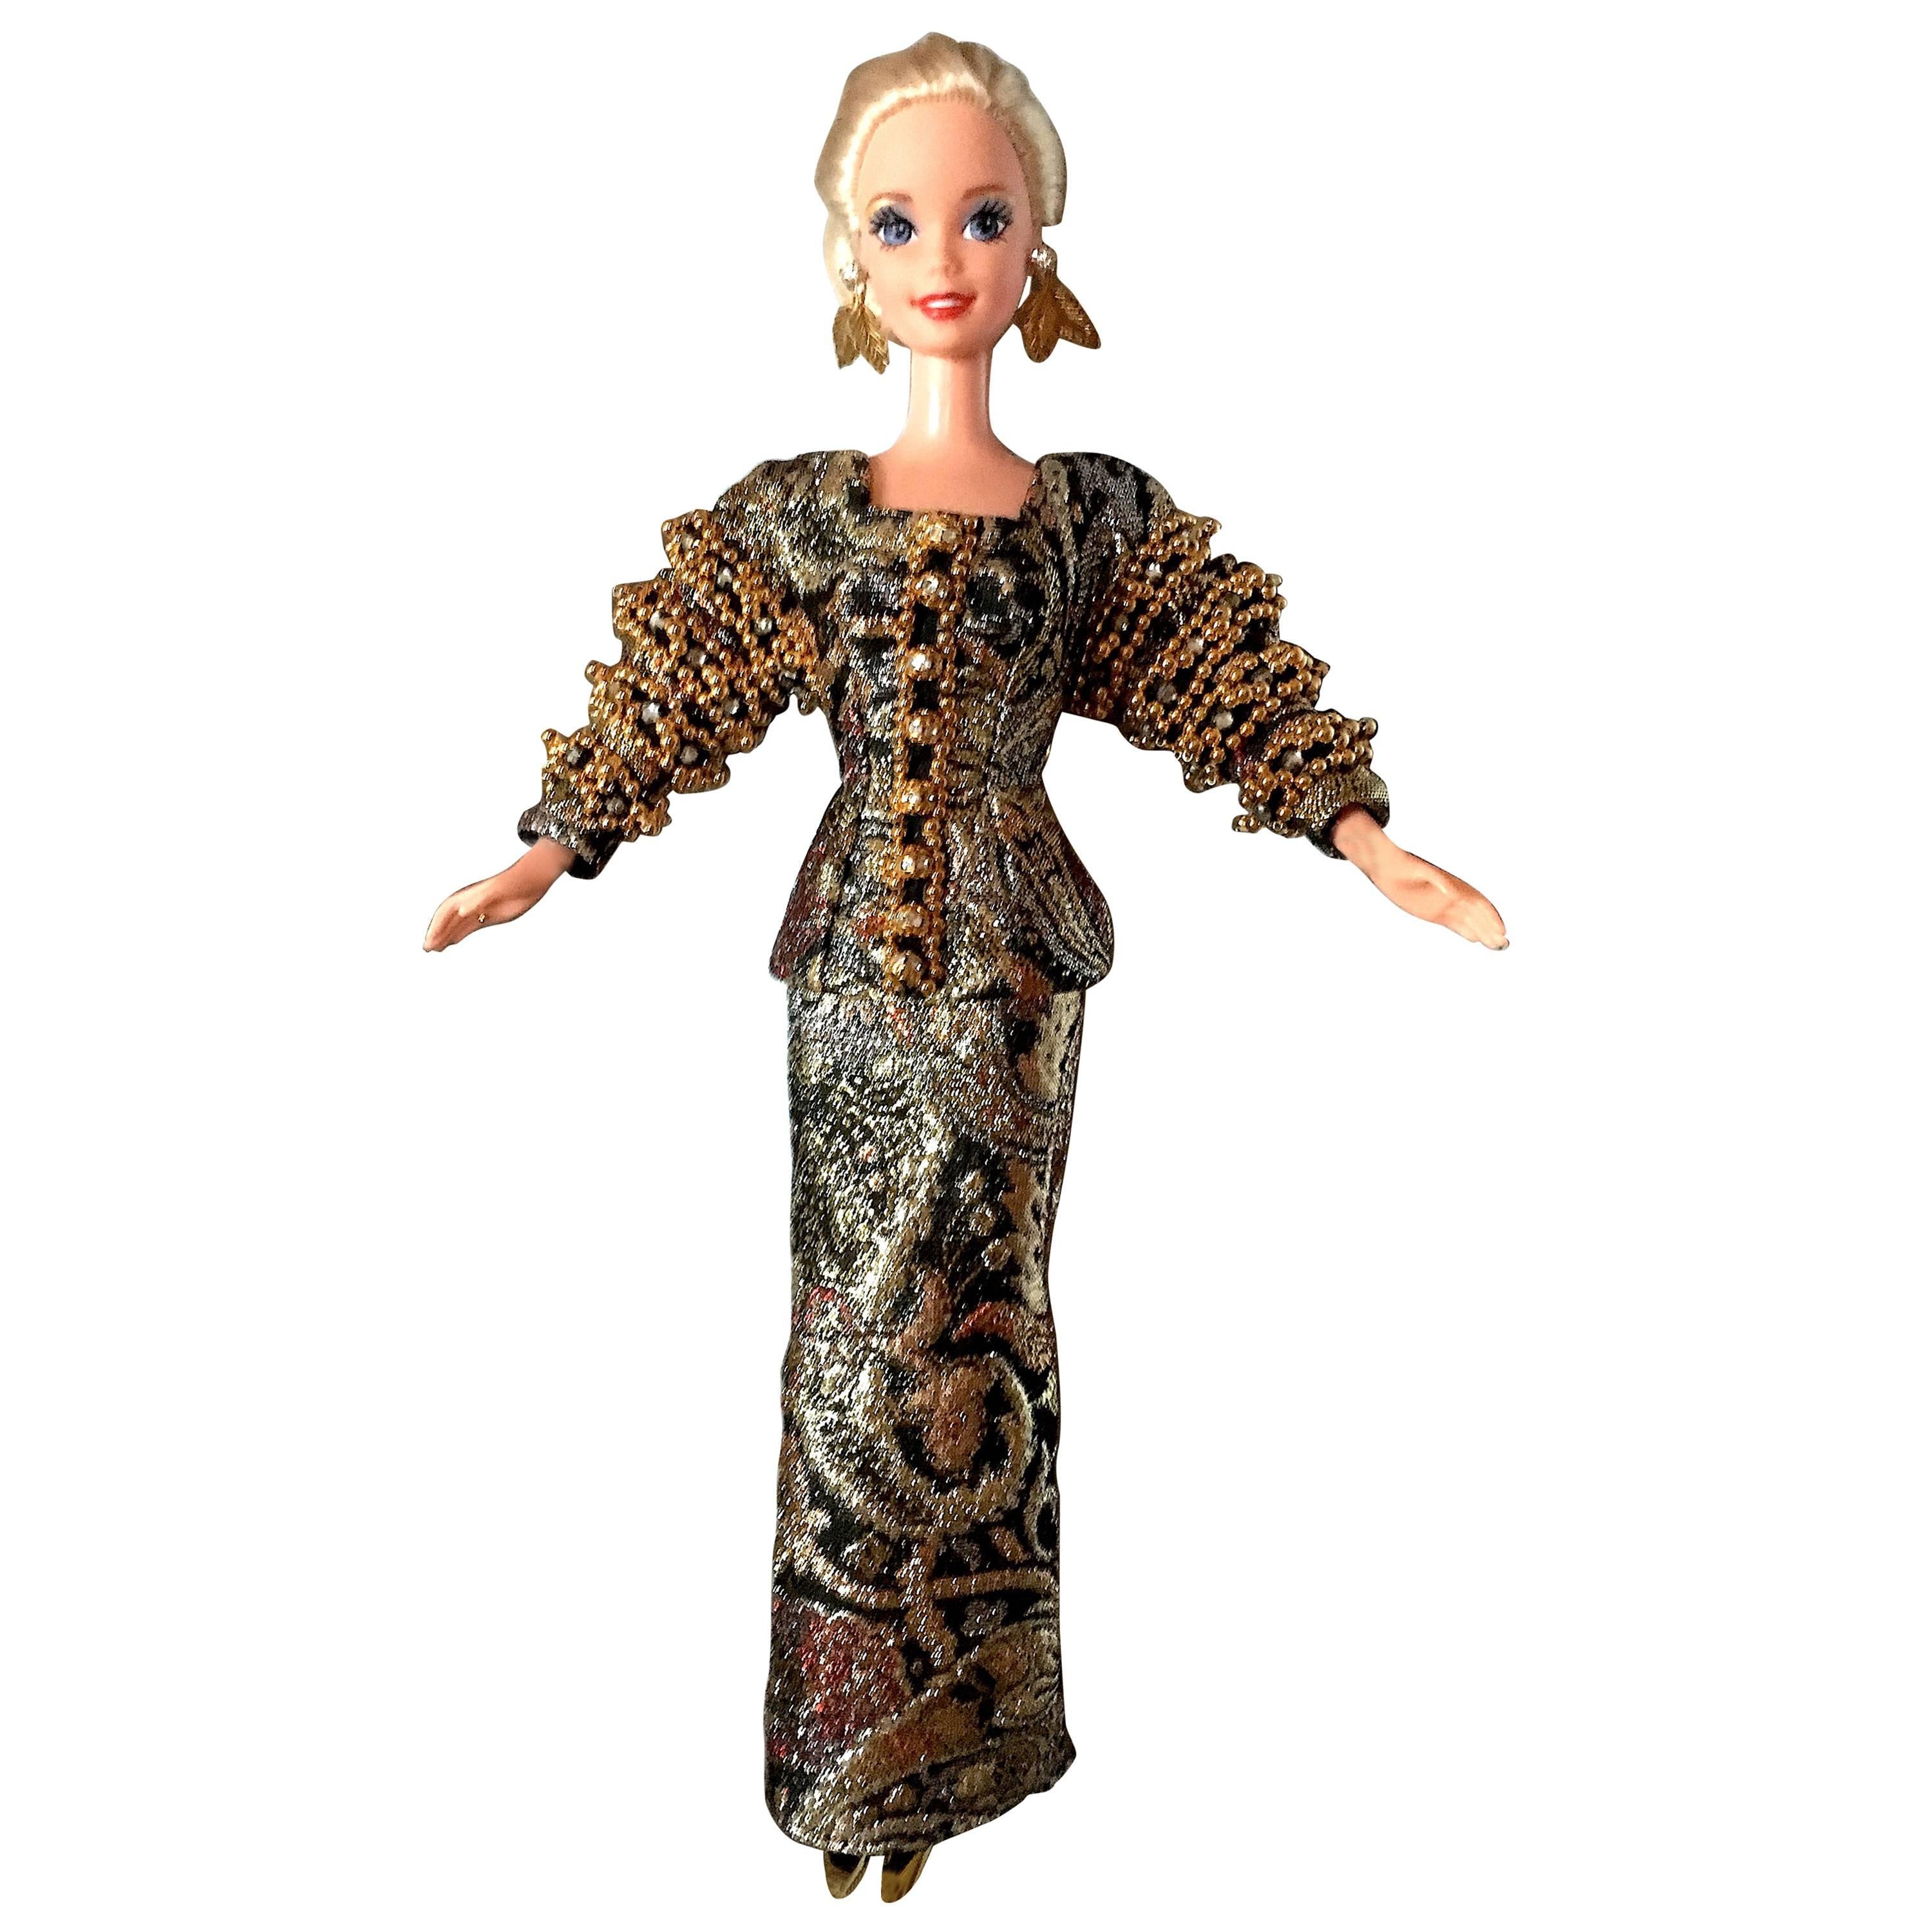 Christian Dior Haute Couture Barbie Doll by Gianfranco Ferre, 1993 